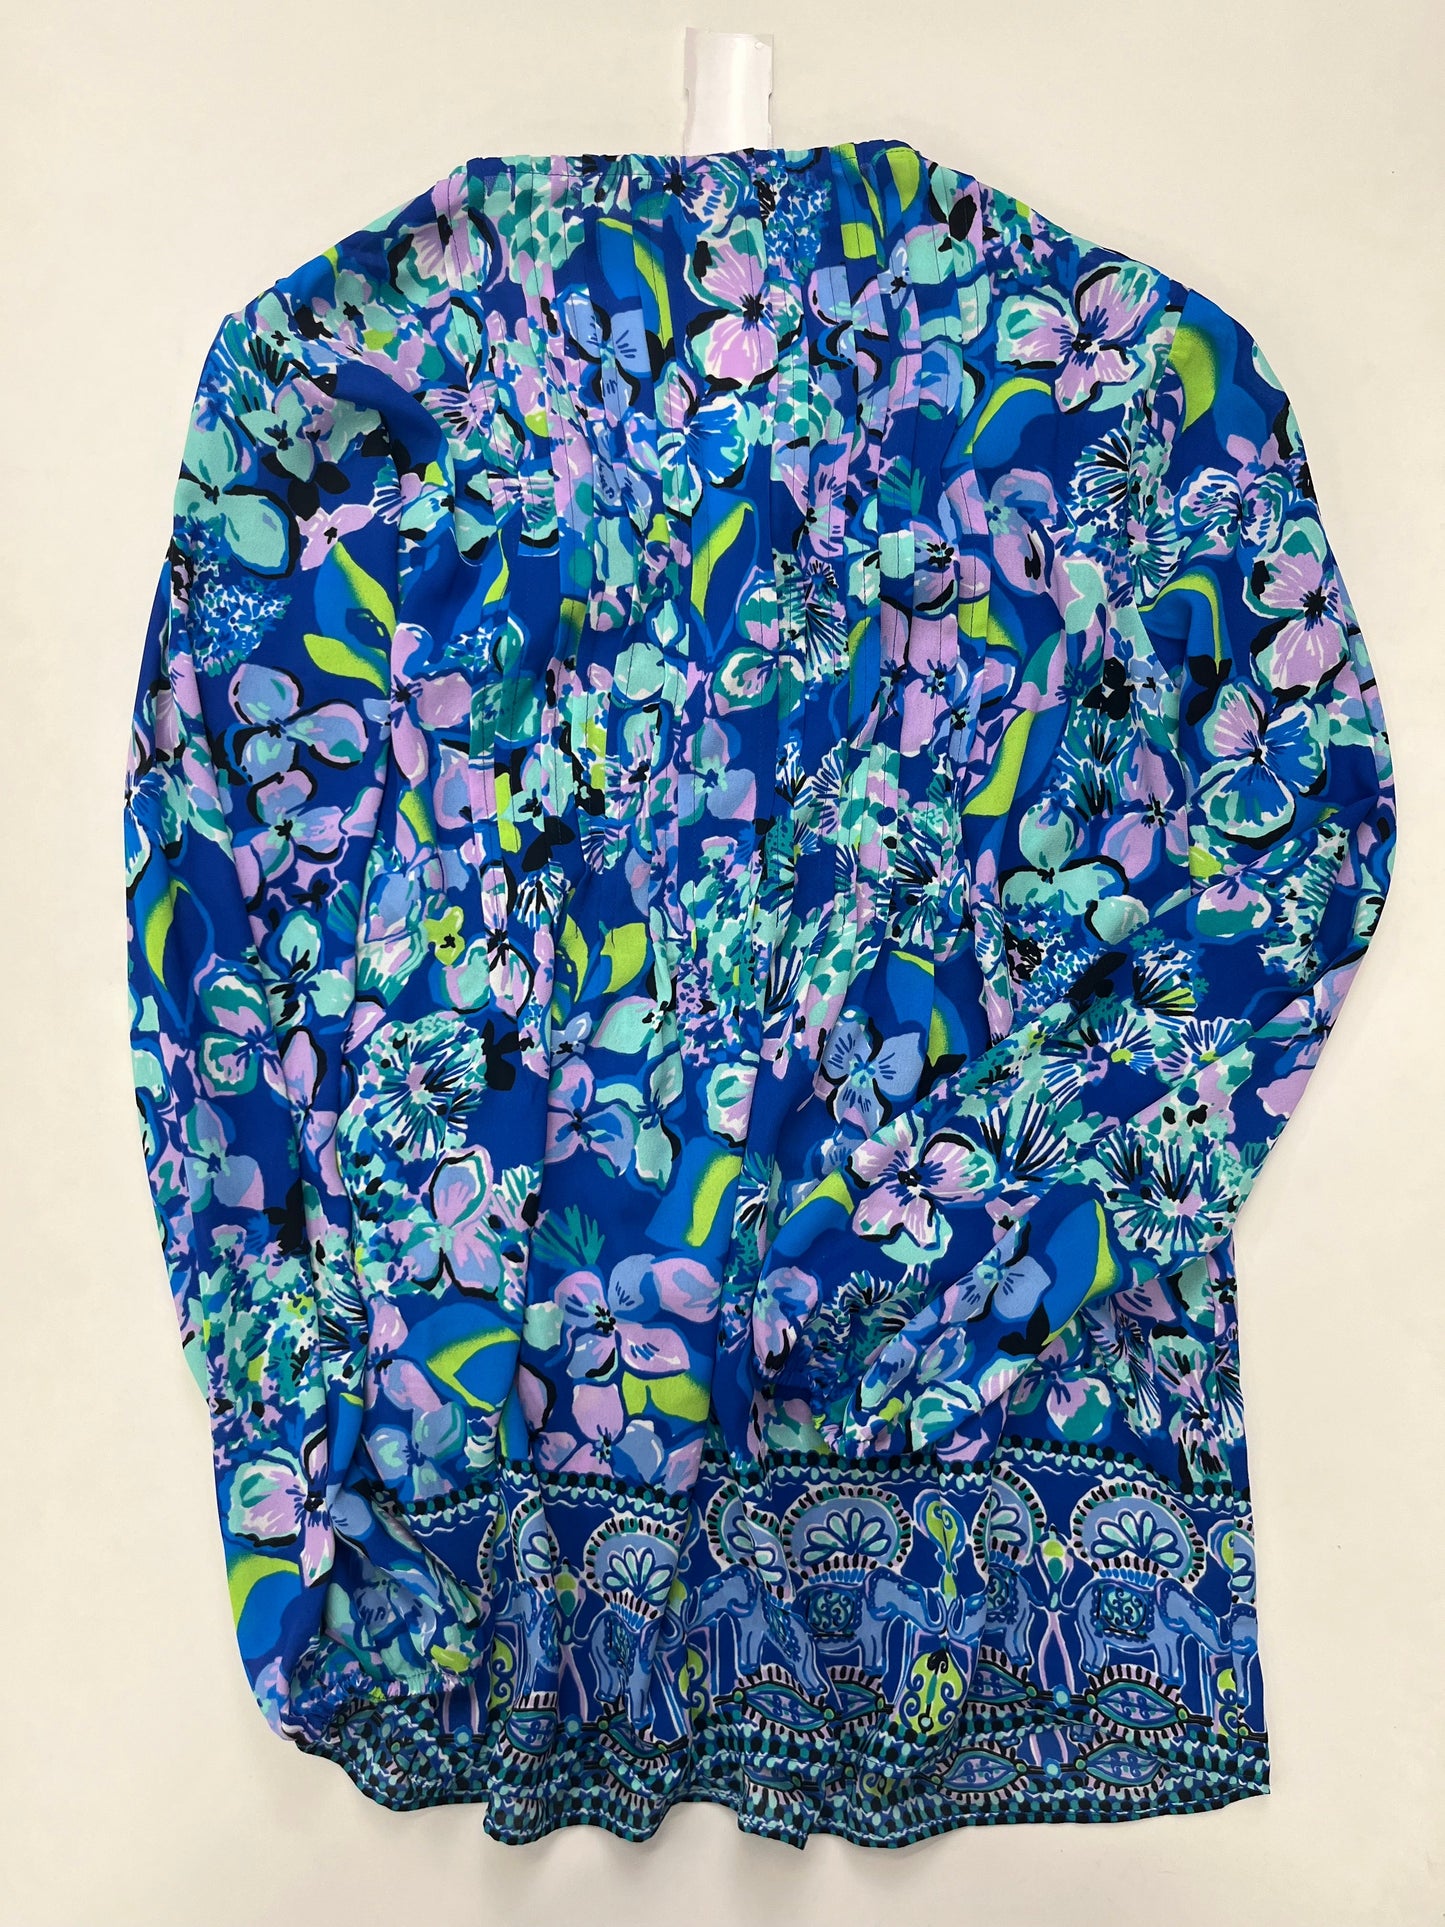 Multi-colored Blouse Long Sleeve Lilly Pulitzer, Size Xs